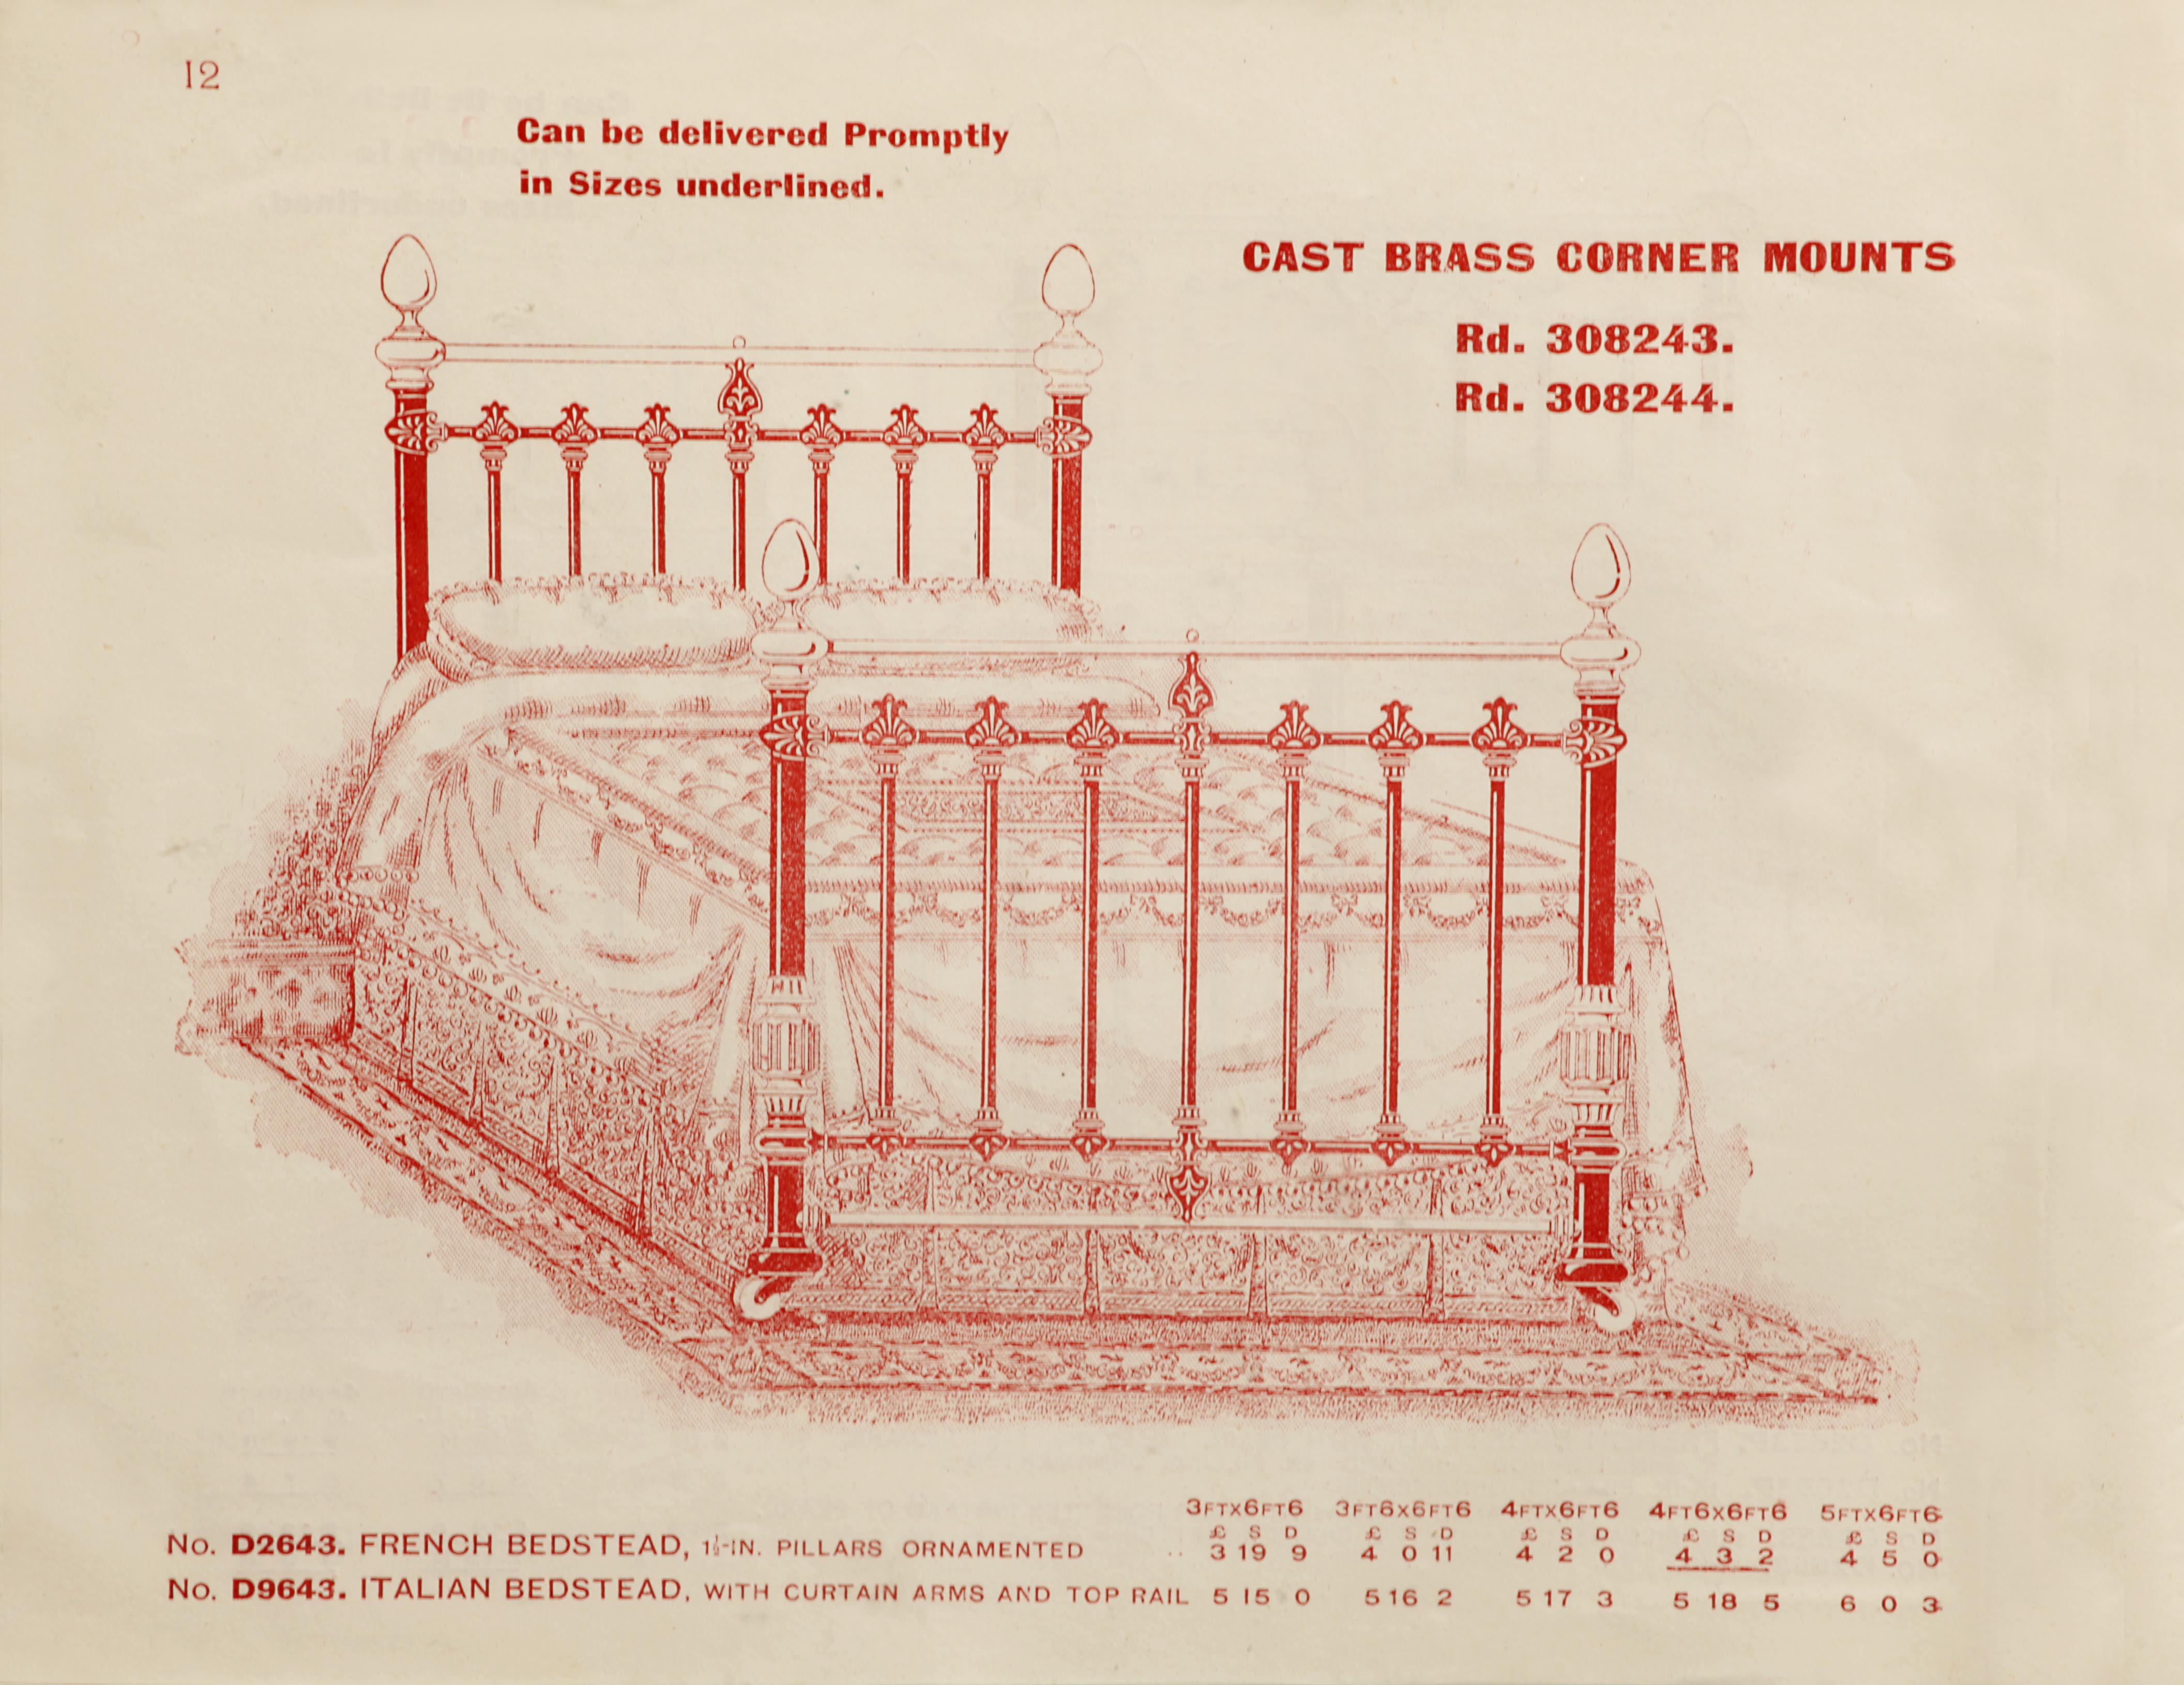 P. Endres Gain Bed Catalog Page 13